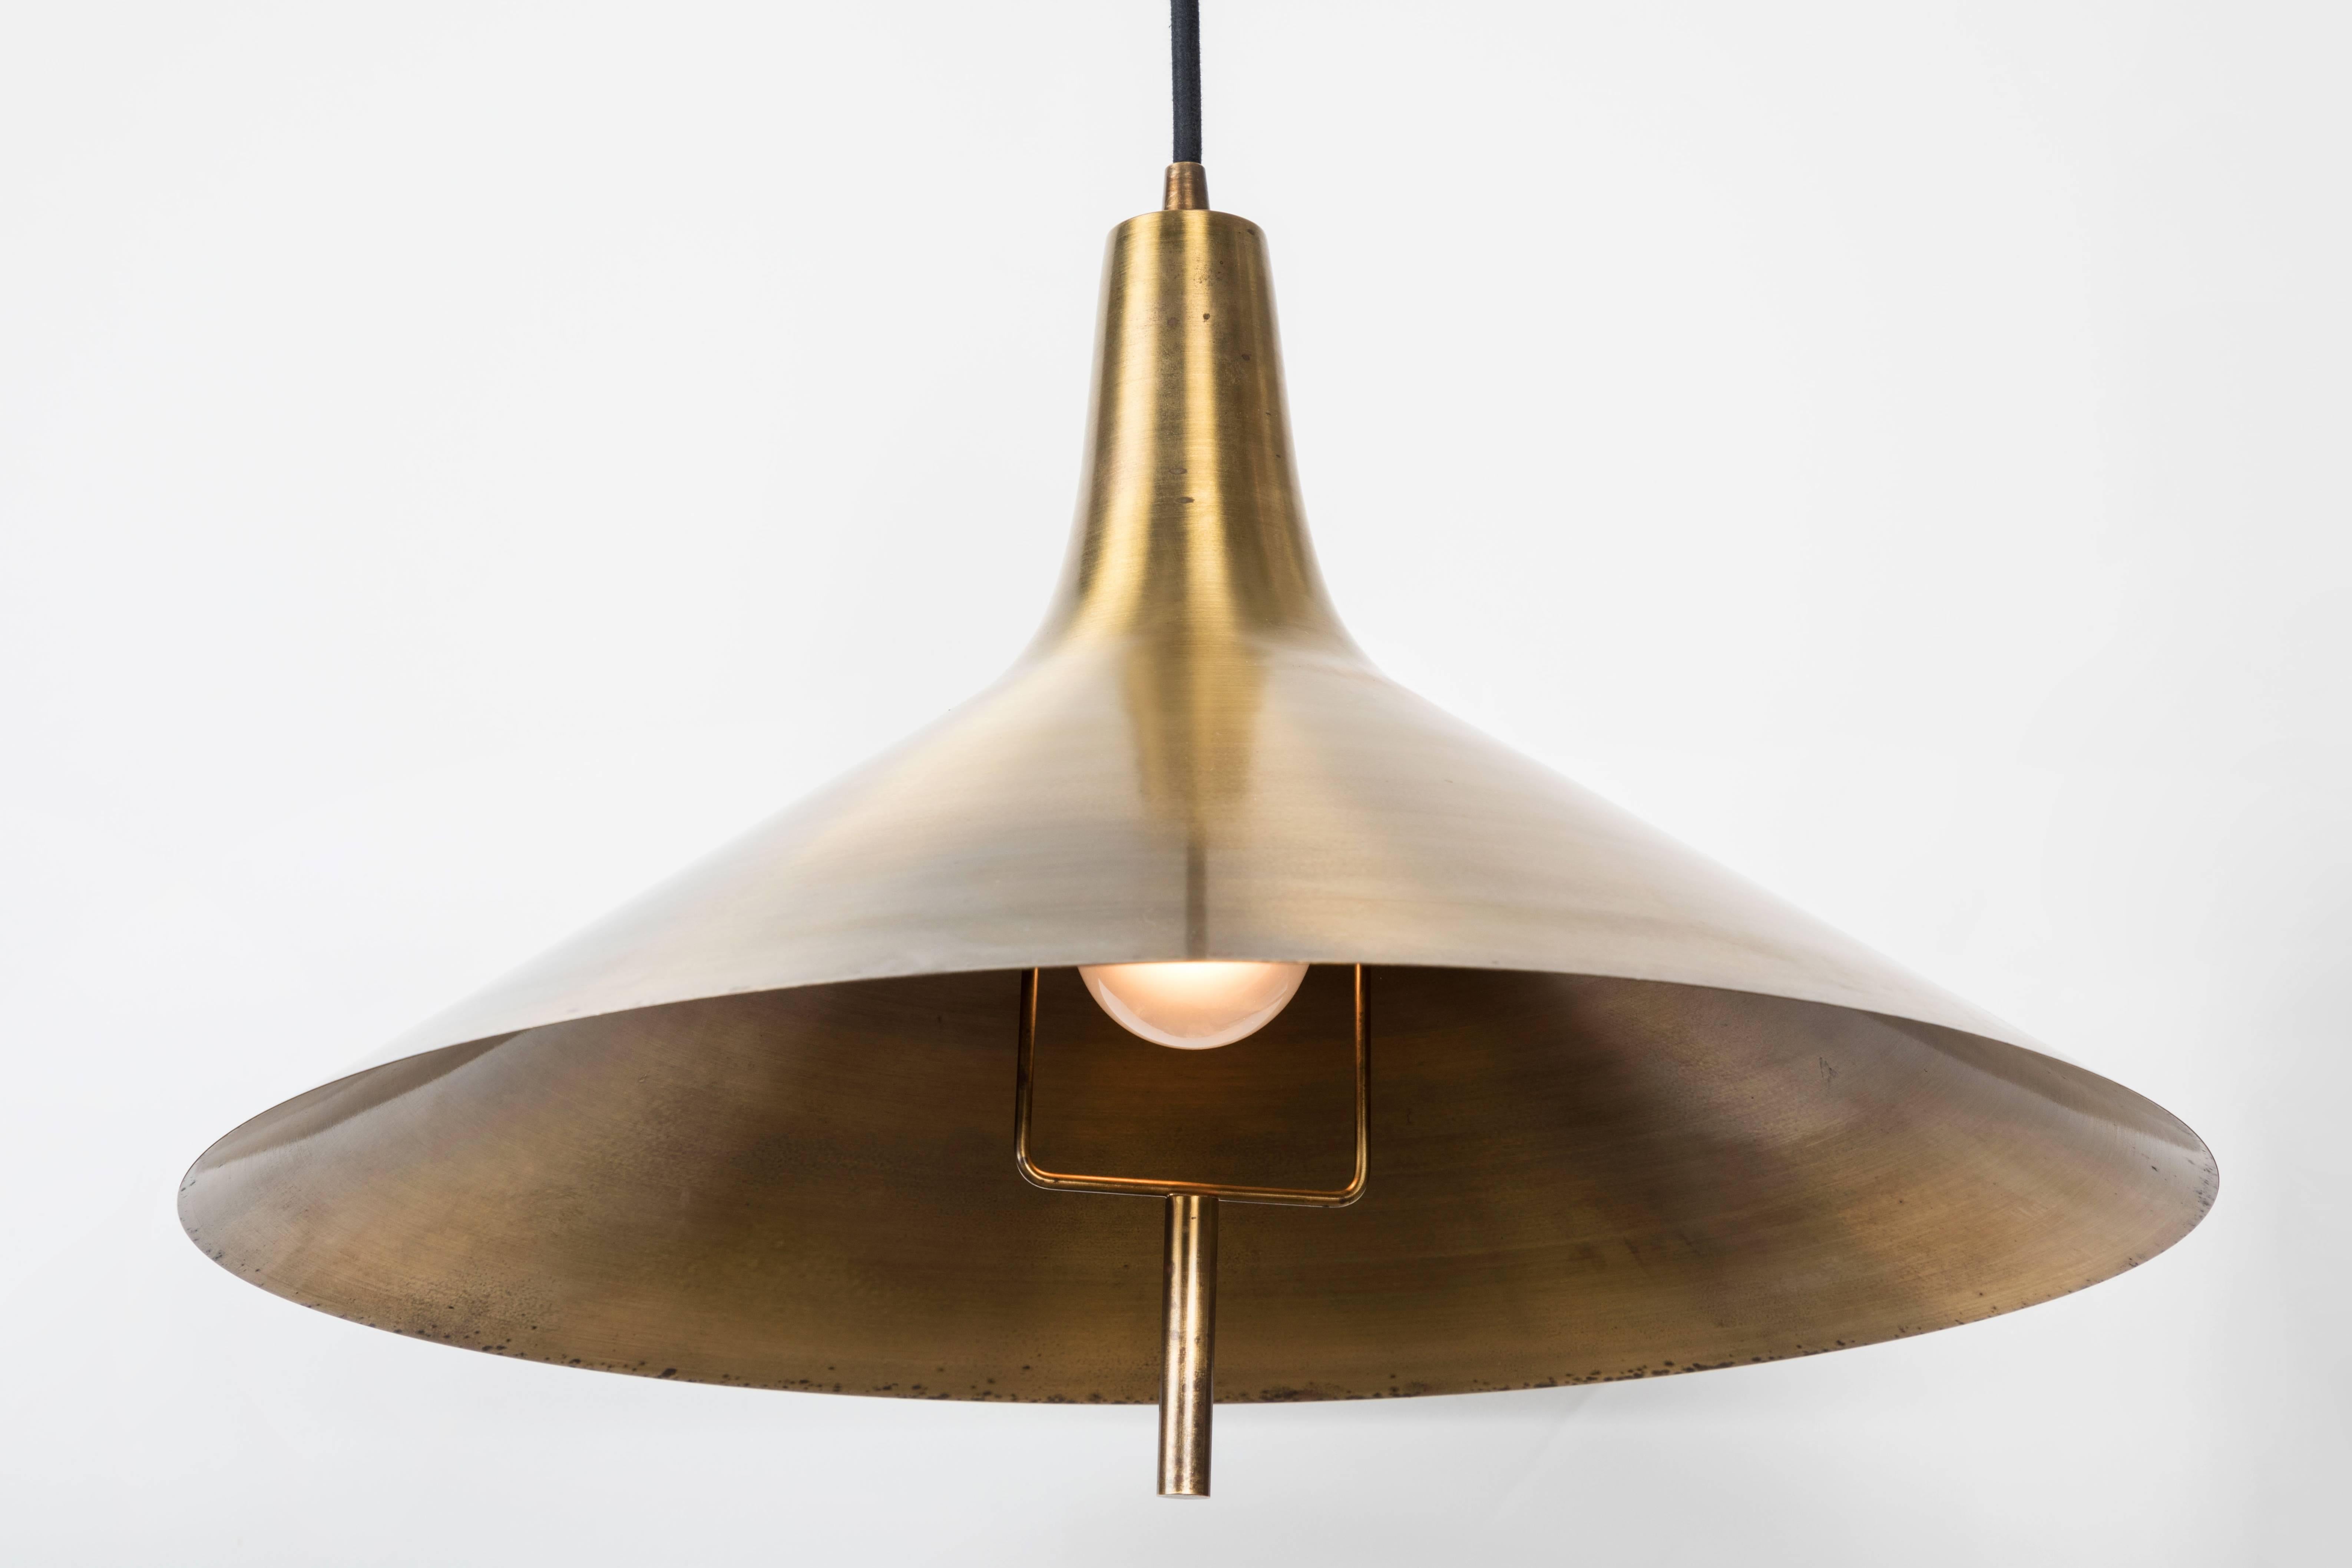 1960s brass pendant for Lyfa Denmark. A quintessentially Danish Minimalist and sculptural light executed in patinated brass and thick black cloth cord.